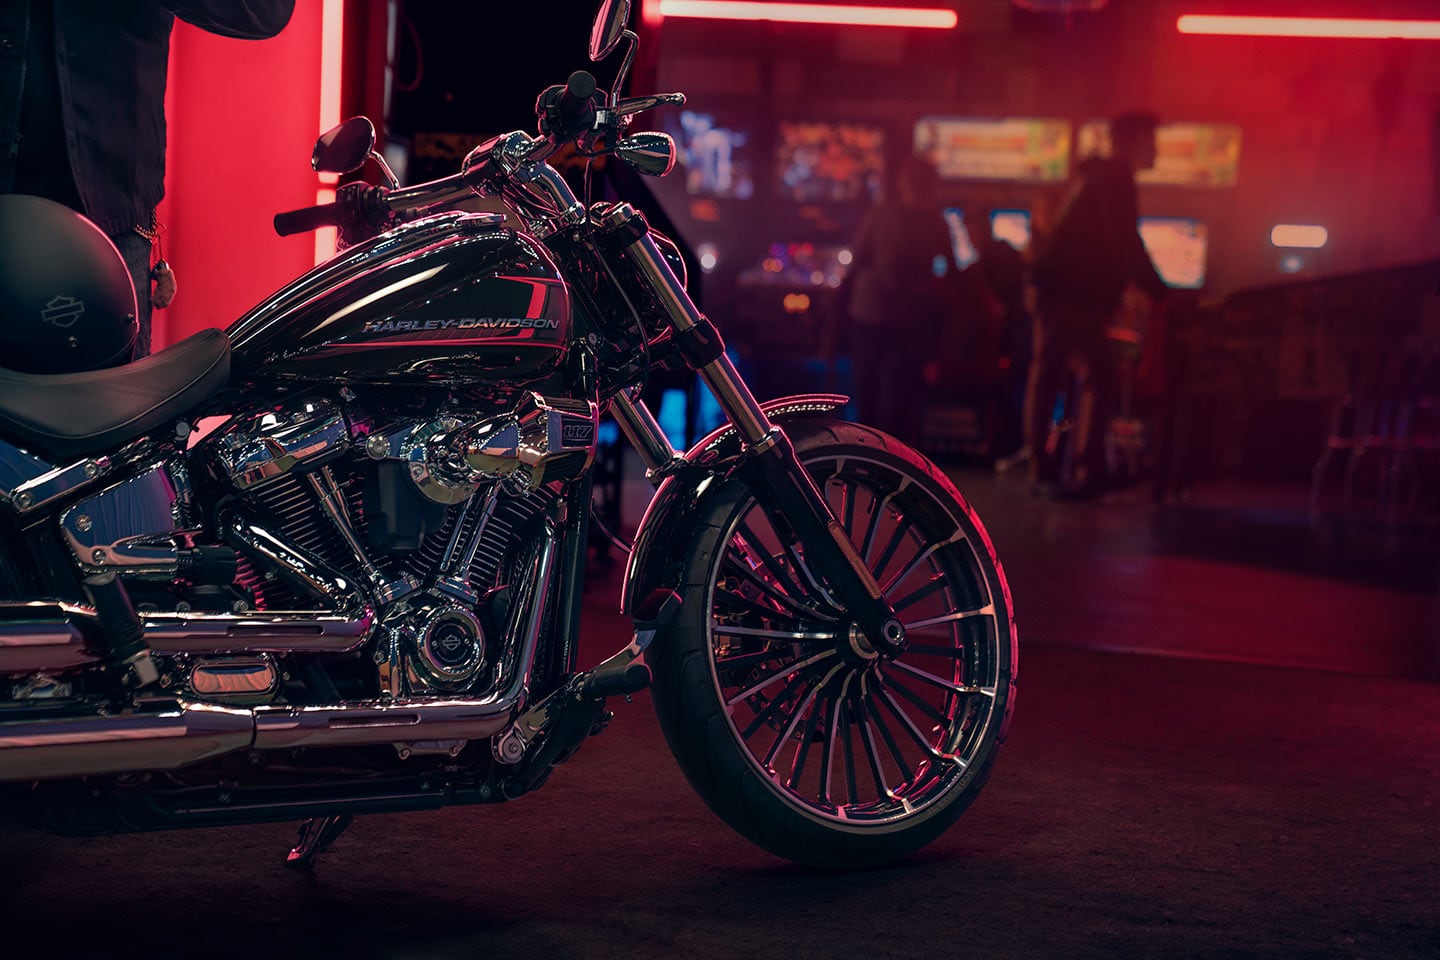 There’s something about the glow of neon on chrome, right? The Milwaukee-Eight 117 breathes through a Heavy Breather intake with an exposed filter. What’s cooler, an exposed air filter hanging out in the breeze or fiberglass-wrapped exhaust headers?